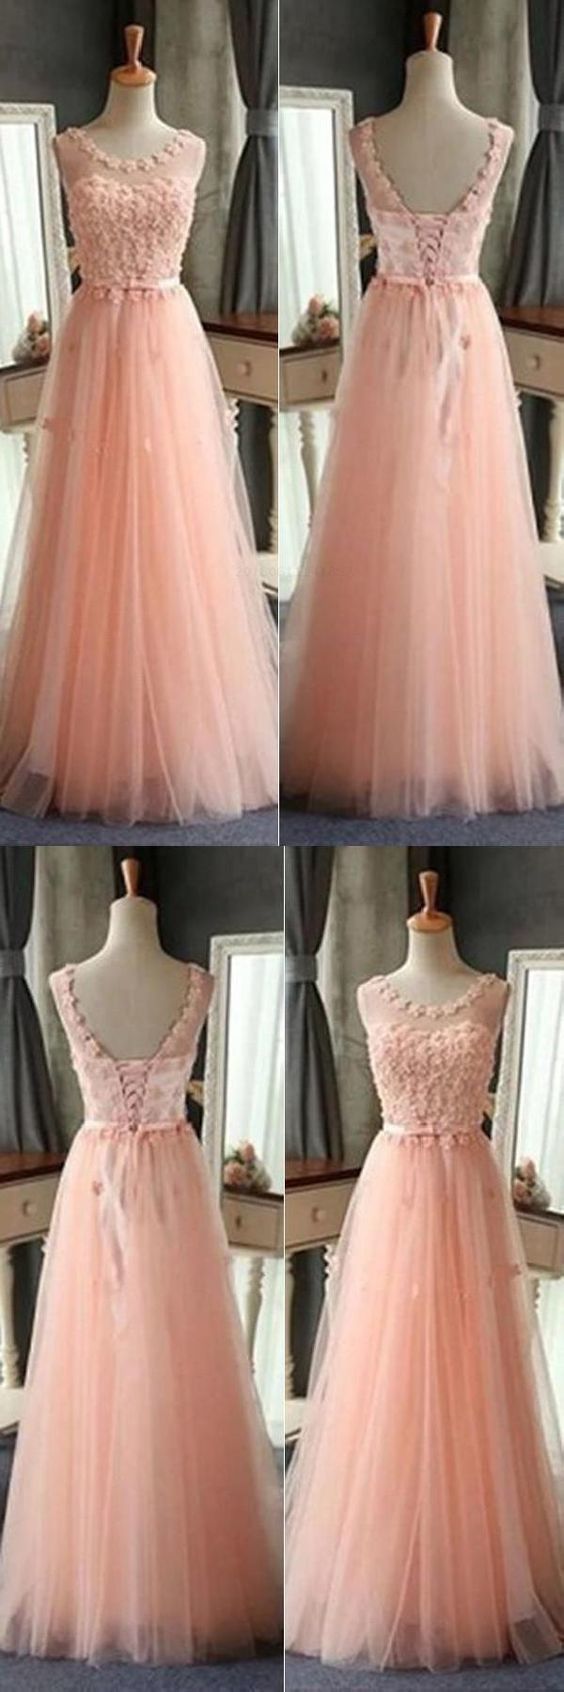 Fashion A Line Pink Tulle Formal Evening Dress Off Shoulder Women Party Gowns .sexy Backless Formal Prom Party Gowns